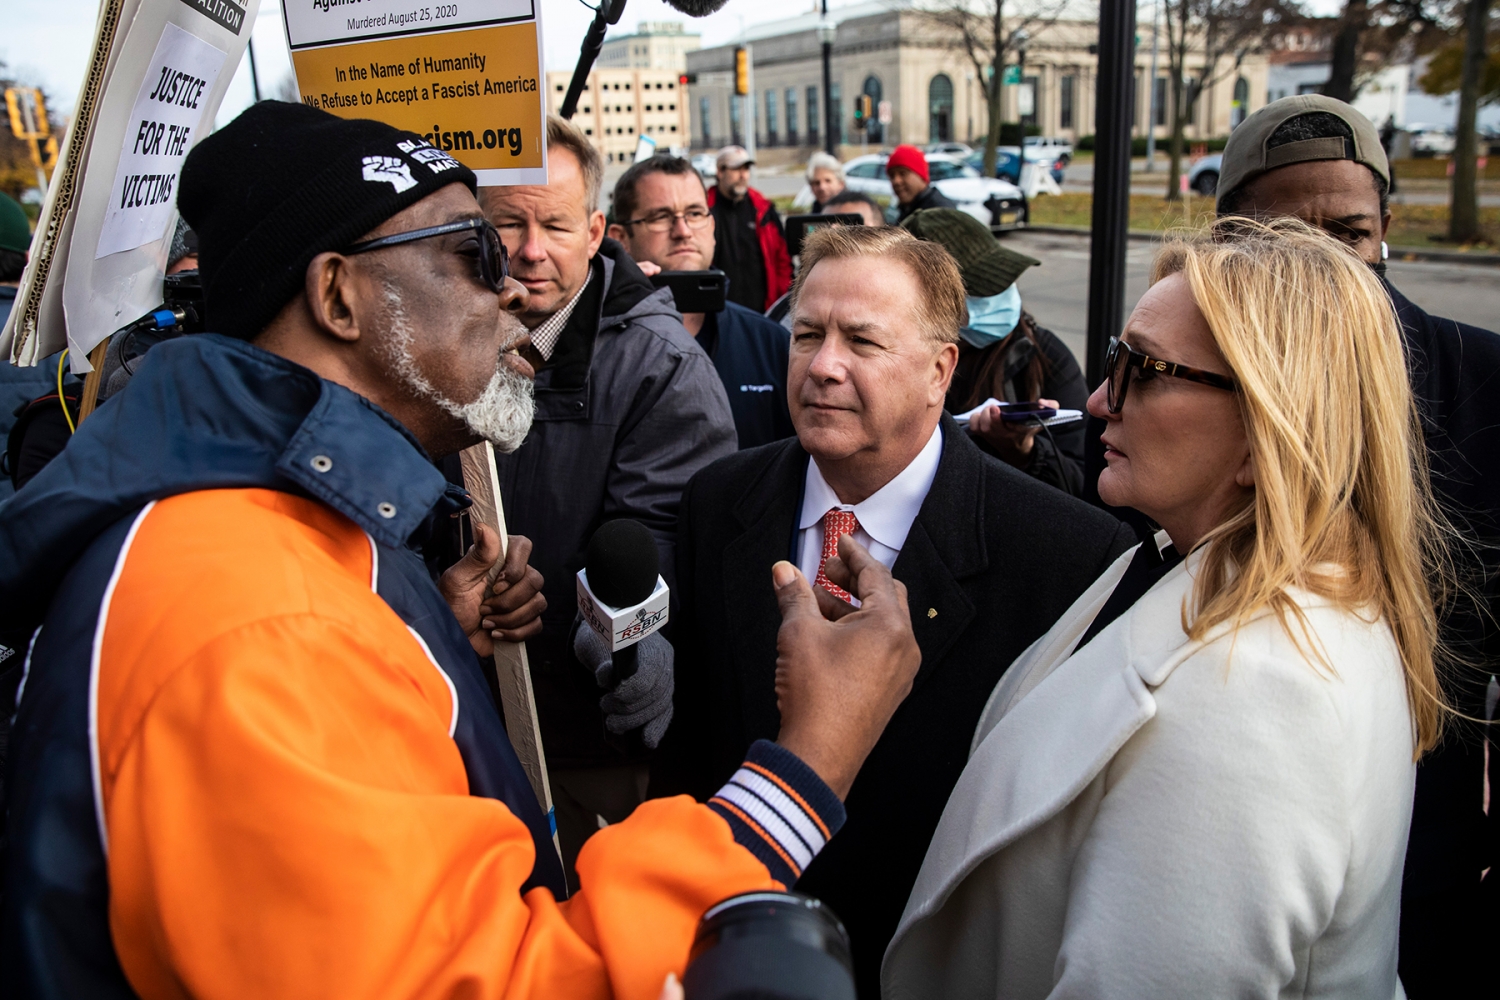 Clyde McLemore, left, founder of Black Lives Matter Lake County, speaks with Mark and Patricia McCloskey outside the Kenosha County Courthouse while the jury deliberates in the Kyle Rittenhouse case inside, in Kenosha, Wis. Tuesday, Nov. 16, 2021. Rittenhouse is accused of killing two people and wounding a third during a protest over police brutality in Kenosha, last year. (Ashlee Rezin /Chicago Sun-Times via AP)